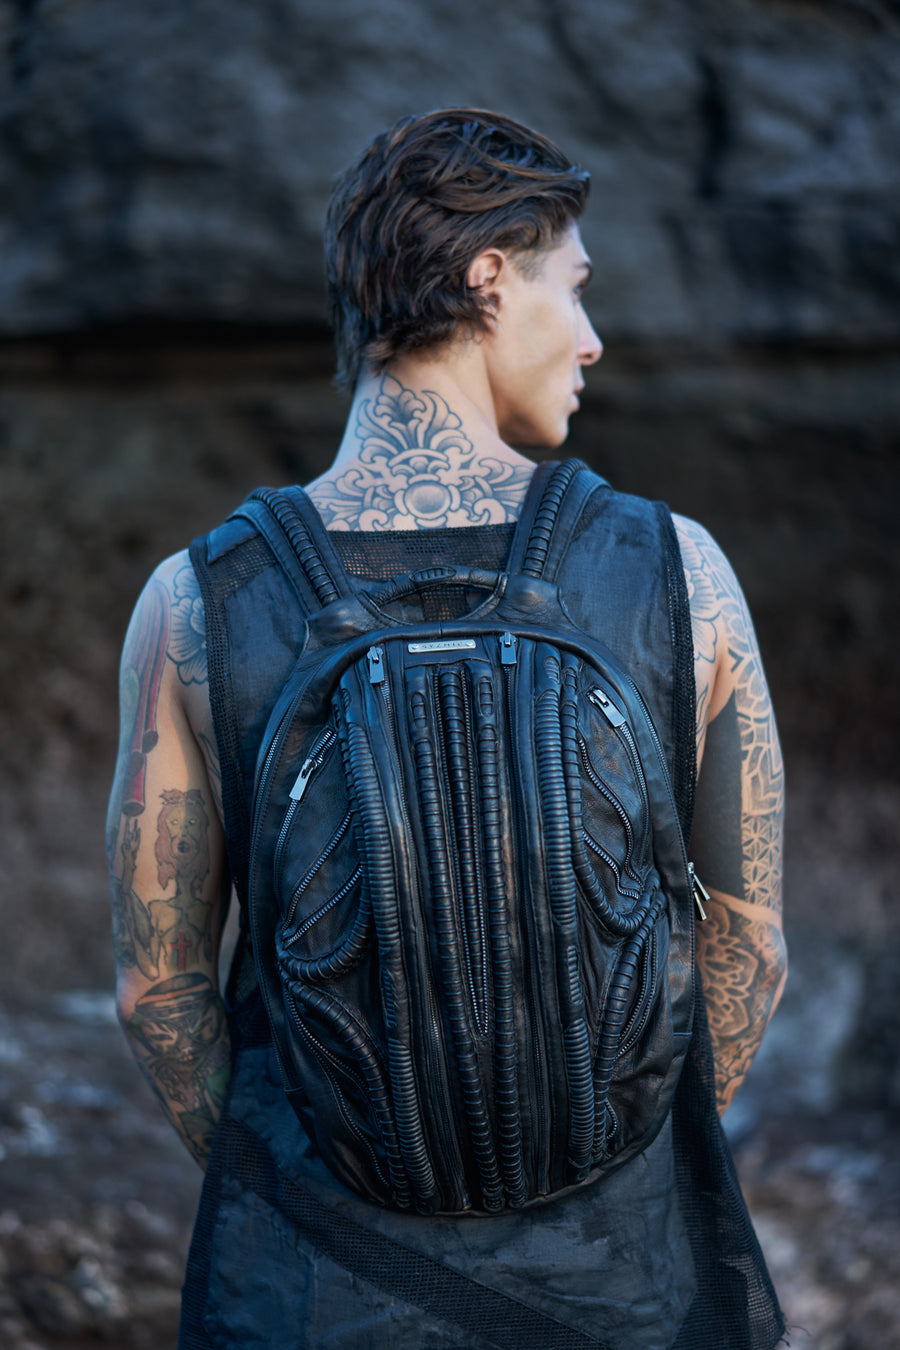 Unisex leather accessories in post-apocalyptic cyberpunk style with men's futuristic textured mesh tank top